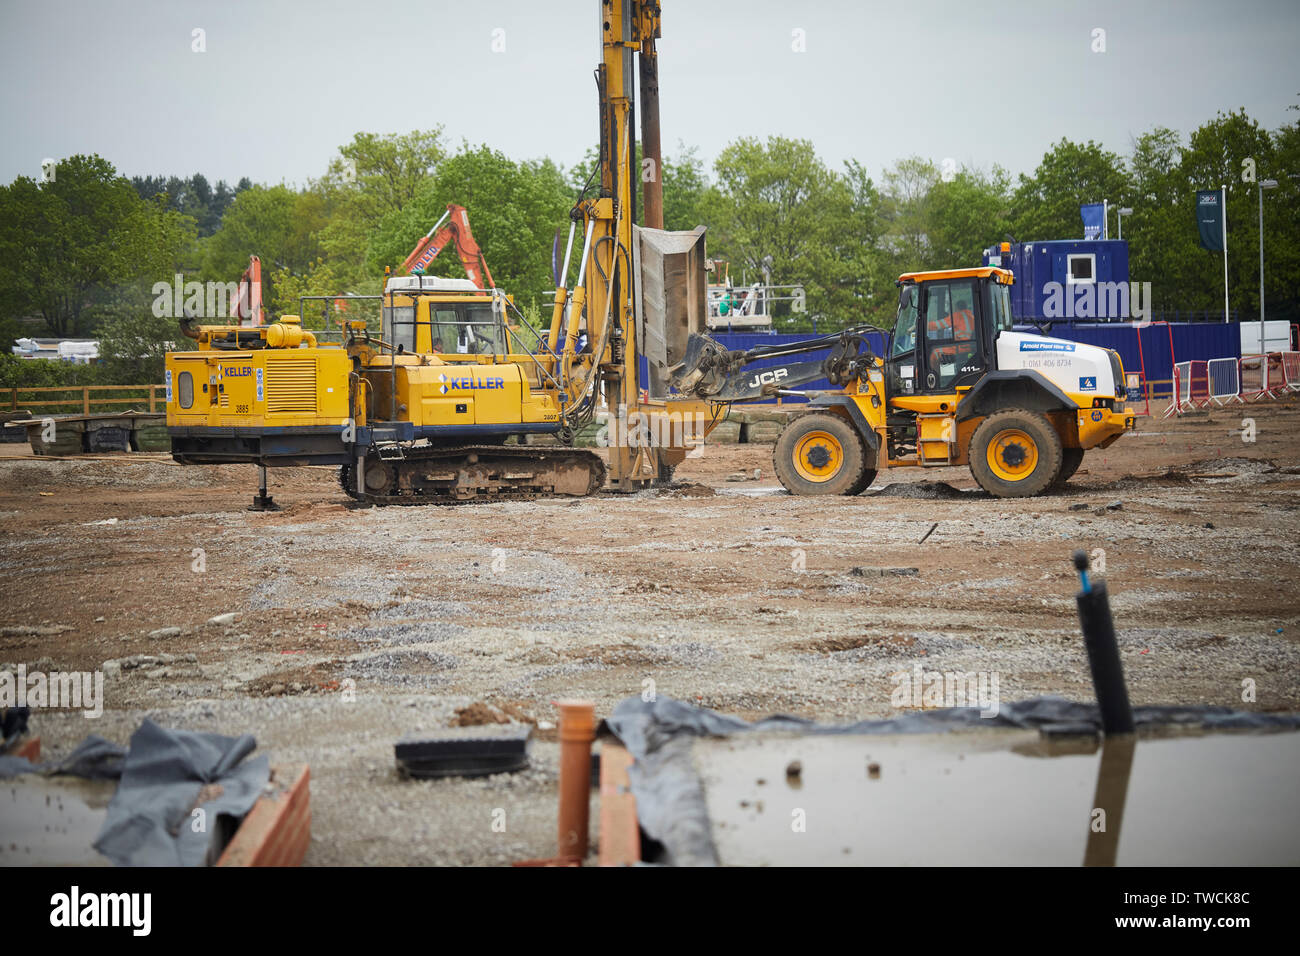 Pile driver rig at work on a building site for new homes in Cheshire forcing stone into the foundations Stock Photo